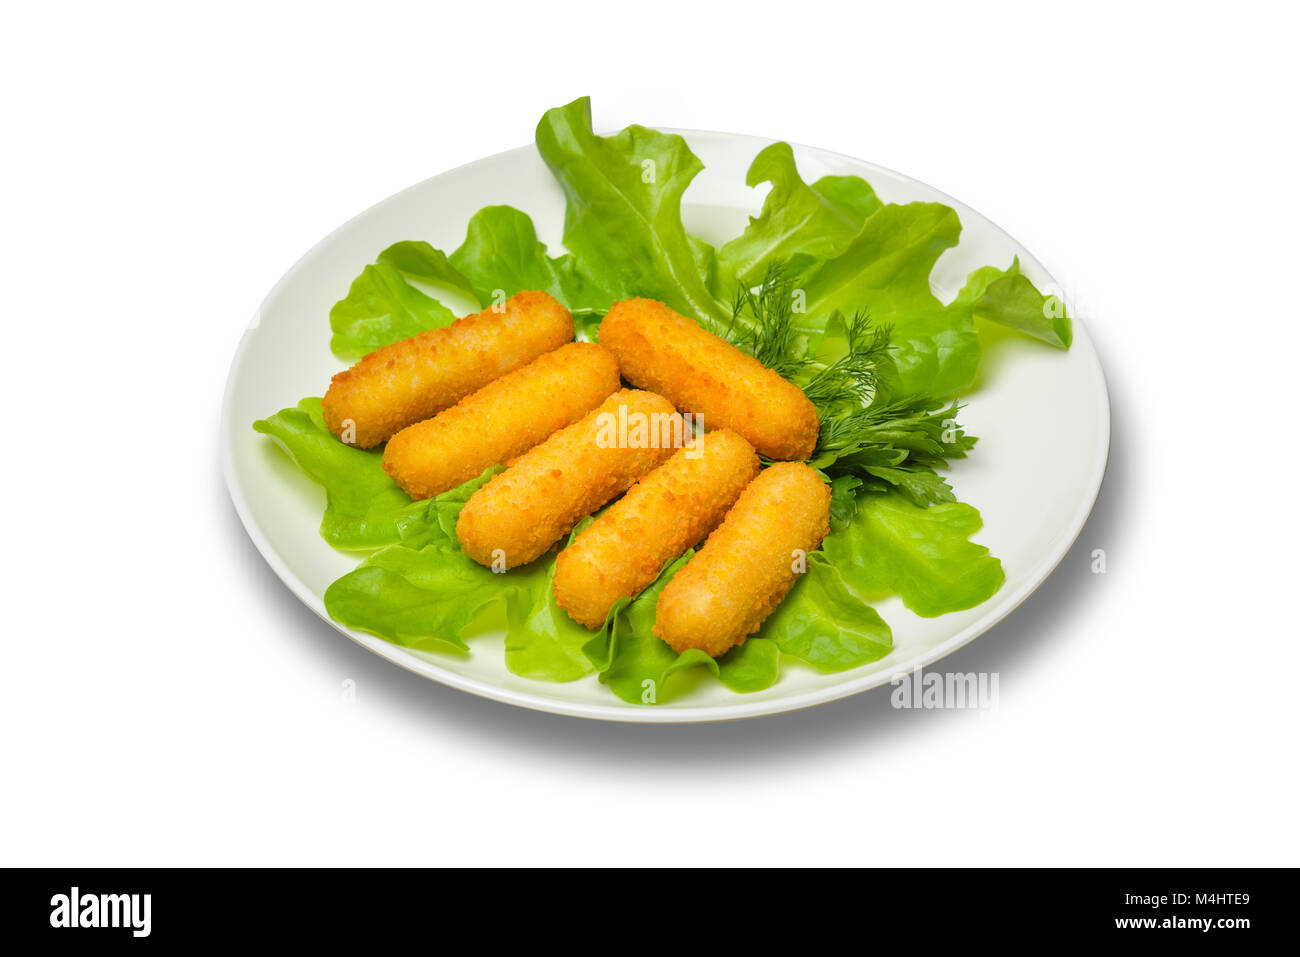 Cheese sticks with salad leaves on a white plate on a white background Stock Photo